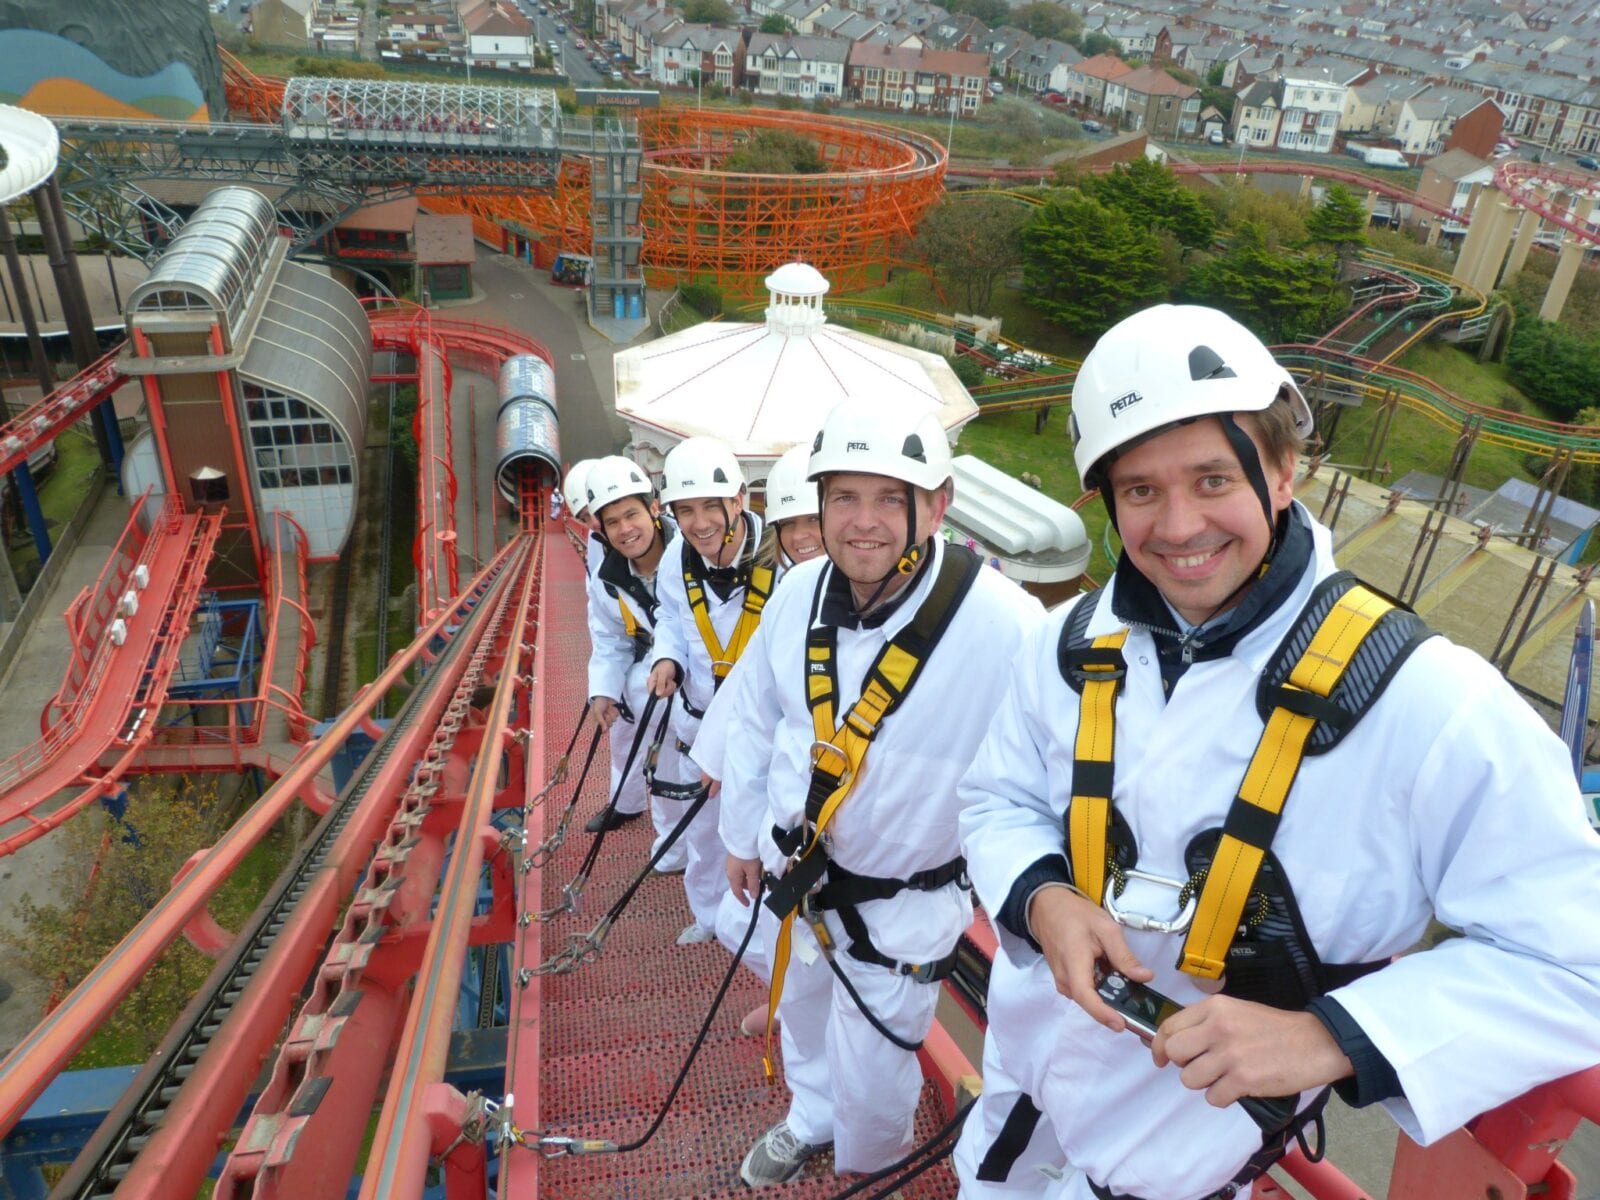 You can take an escorted 235ft climb to the top of the Big One in Blackpool next year, The Manc